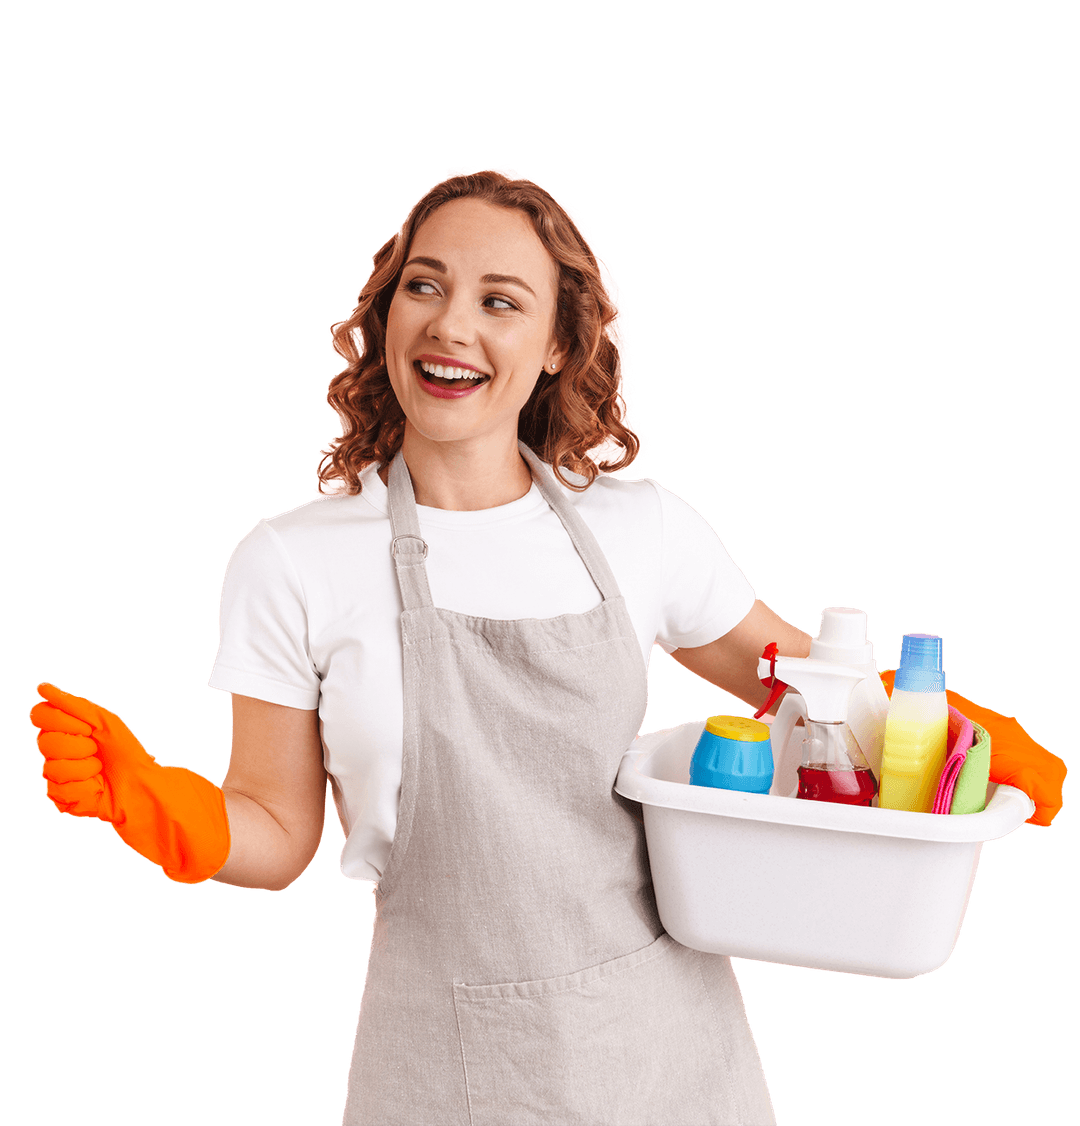 image of Professional Home Cleaners in Orleans wearing cleaning clothes